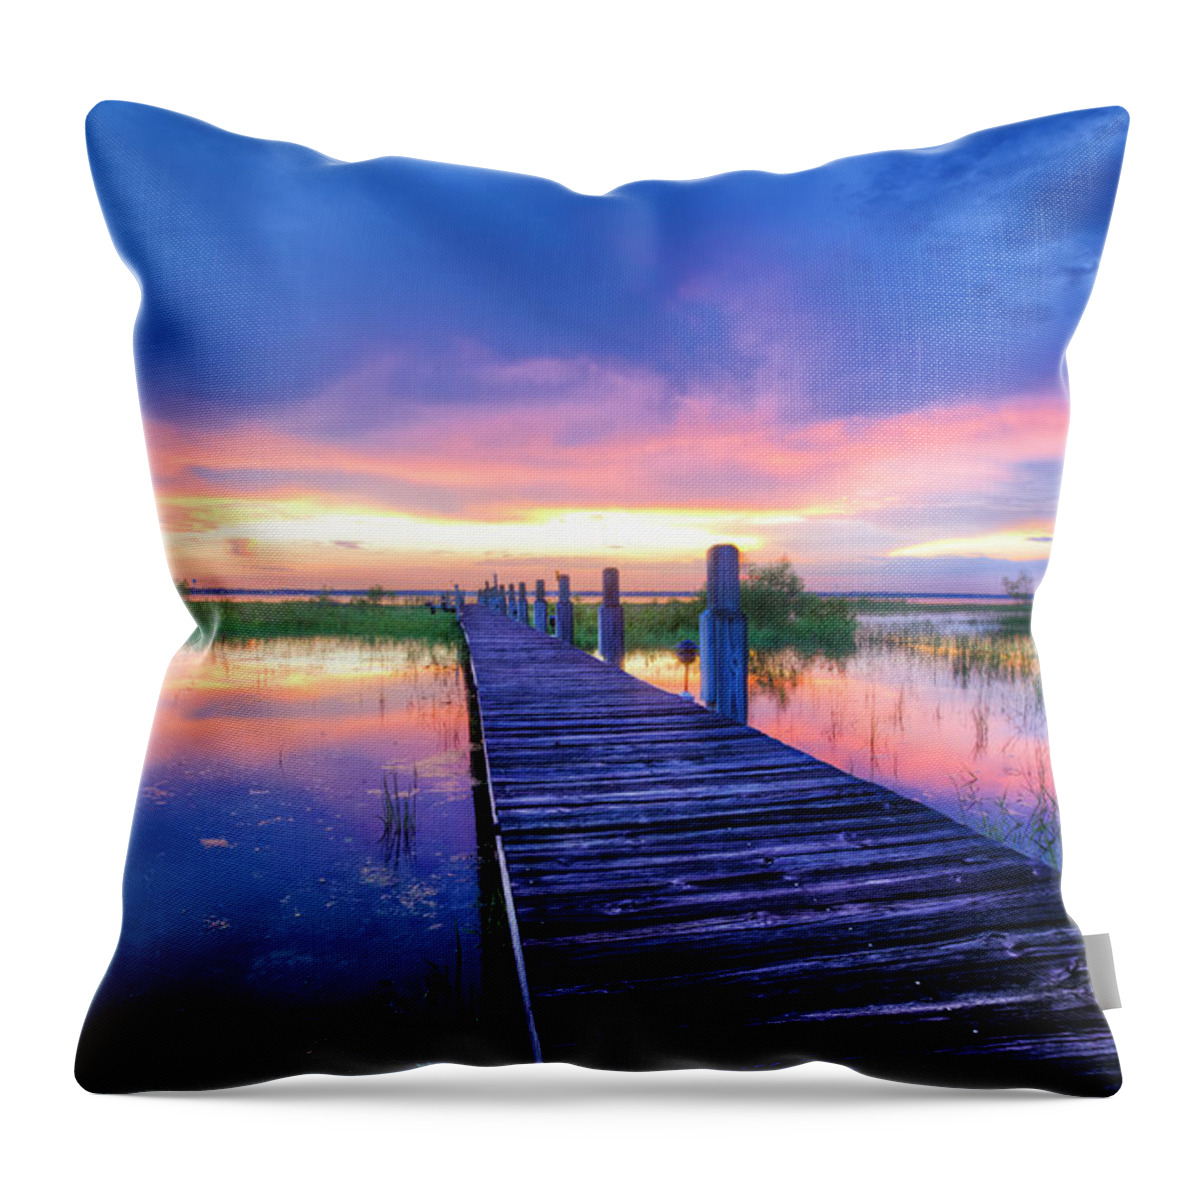 Clouds Throw Pillow featuring the photograph The Long Dock by Debra and Dave Vanderlaan